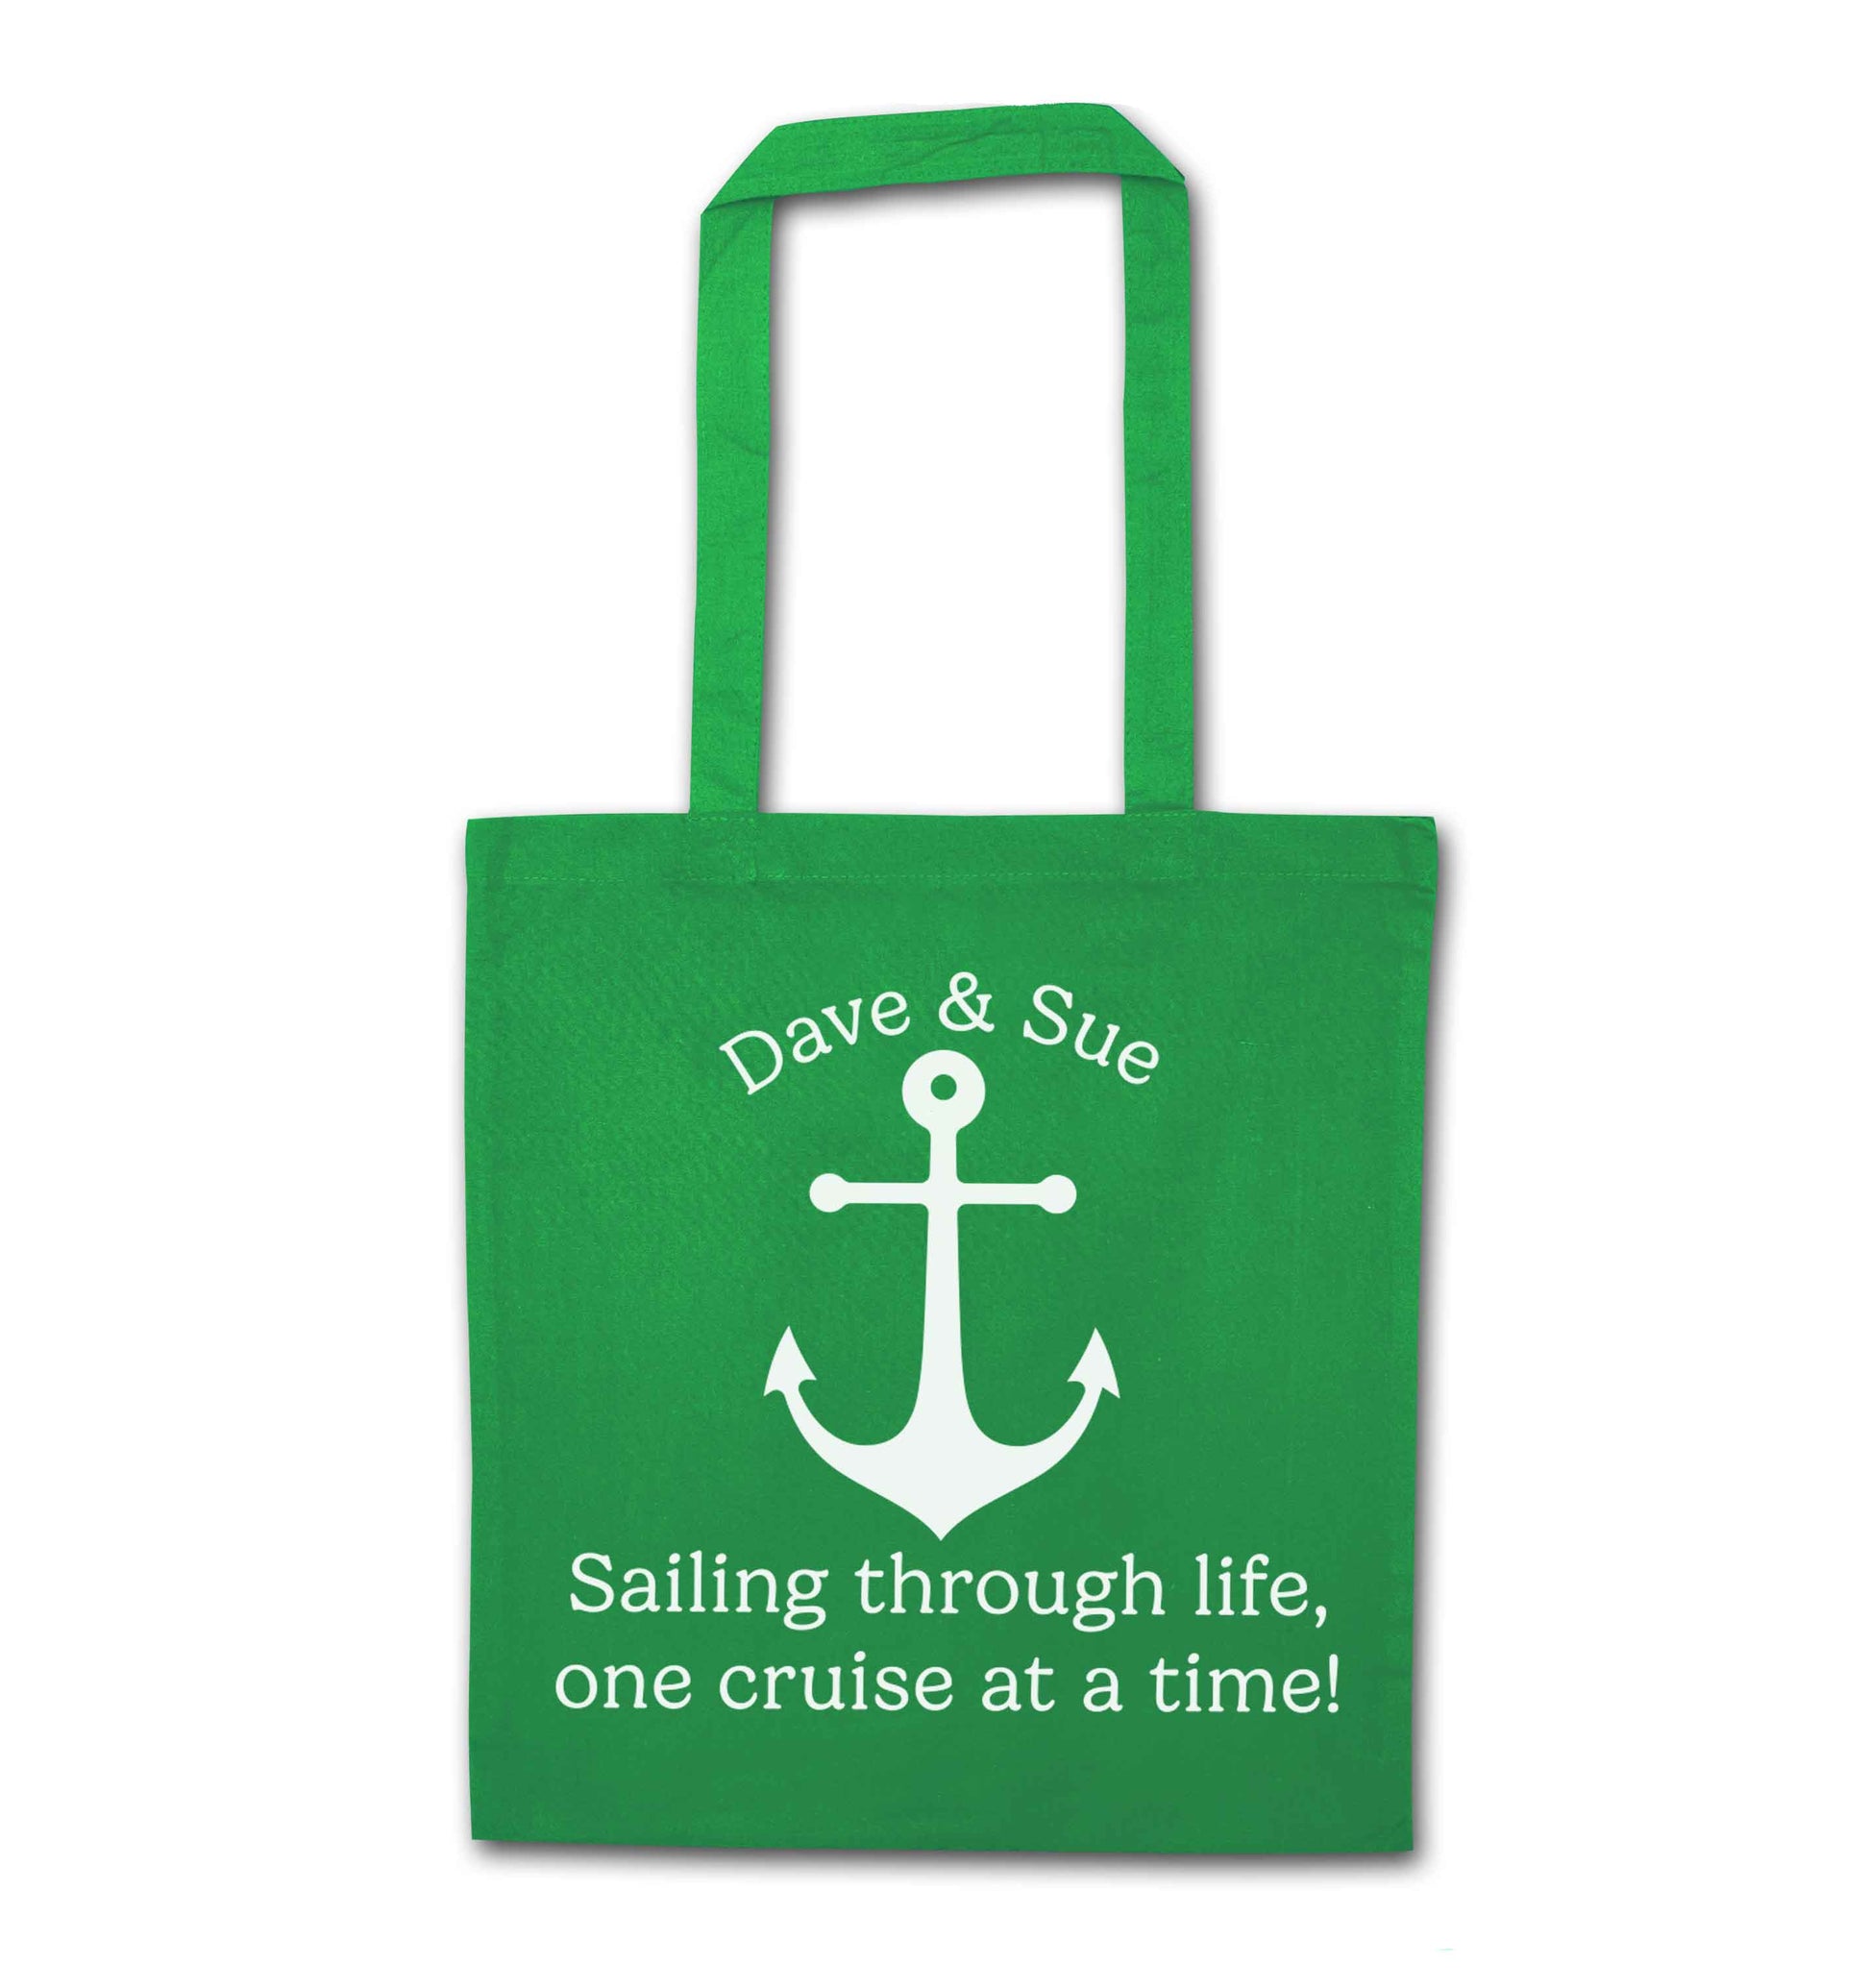 Sailing through life one cruise at a time - personalised green tote bag